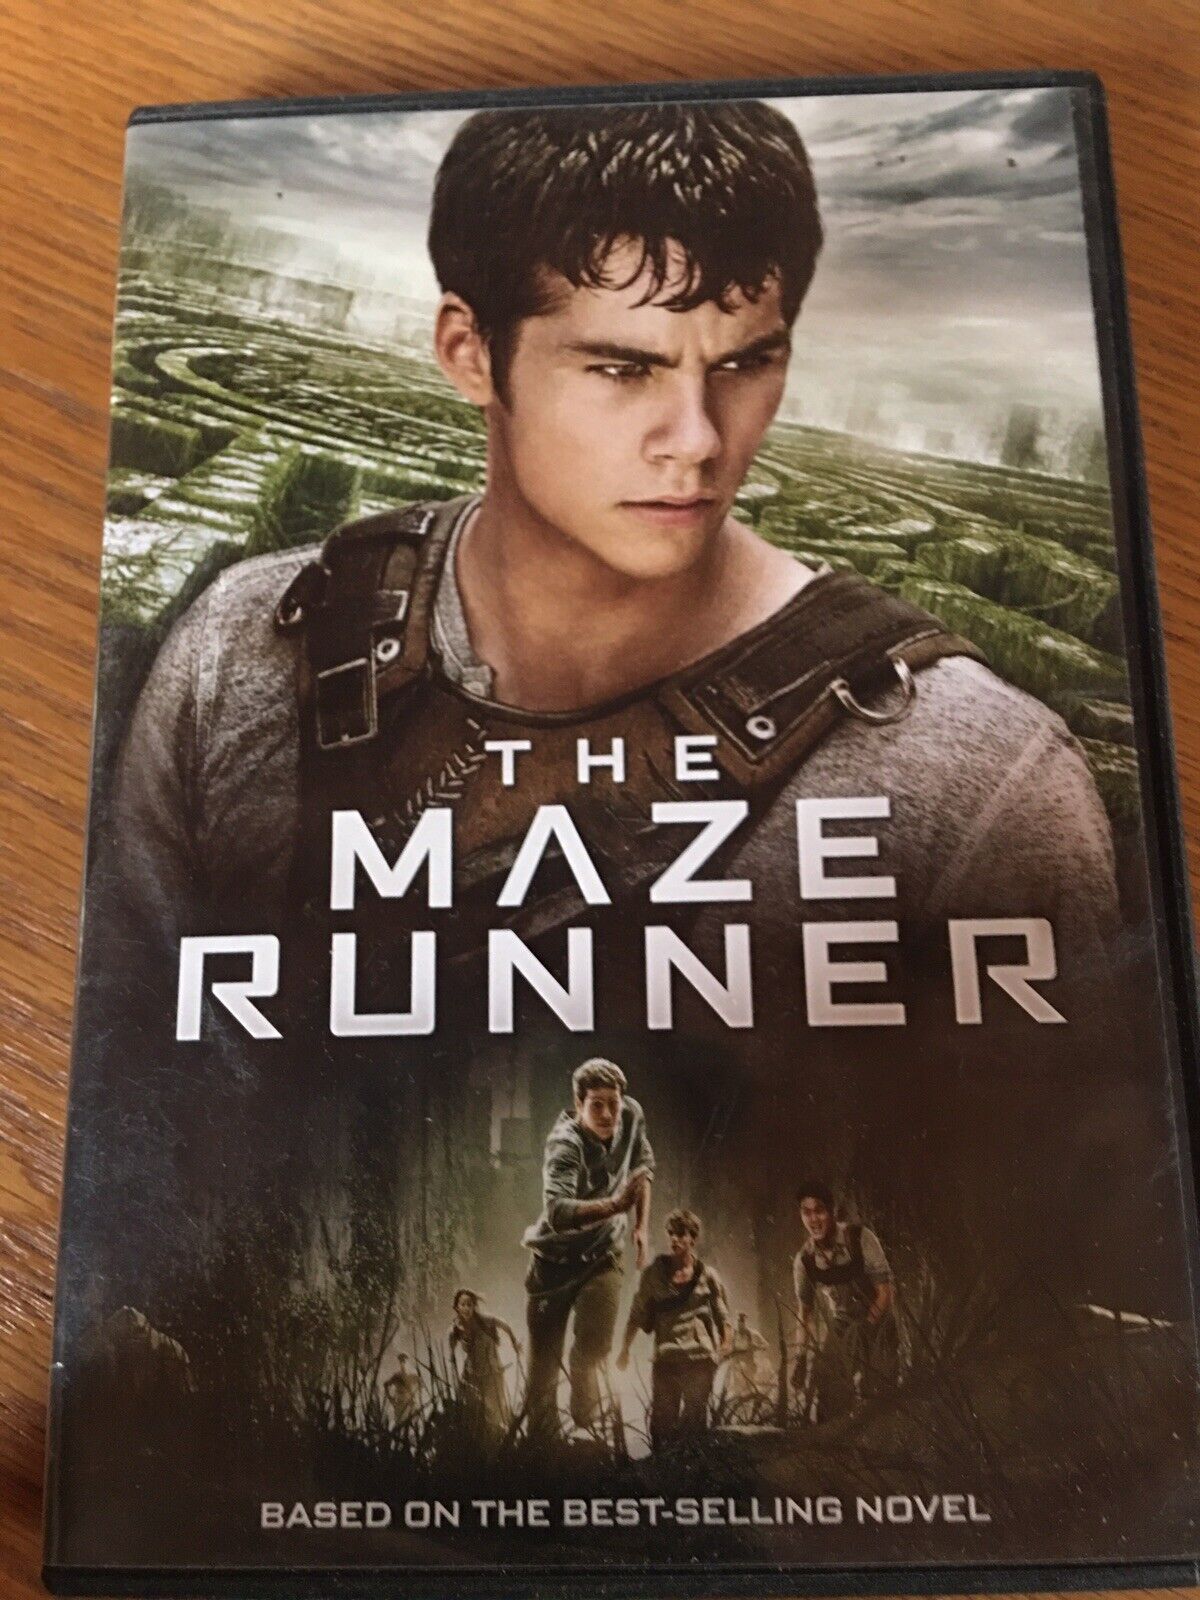 The Maze Runner (DVD, 2014) Widescreen,Special Features, Like New Condition.